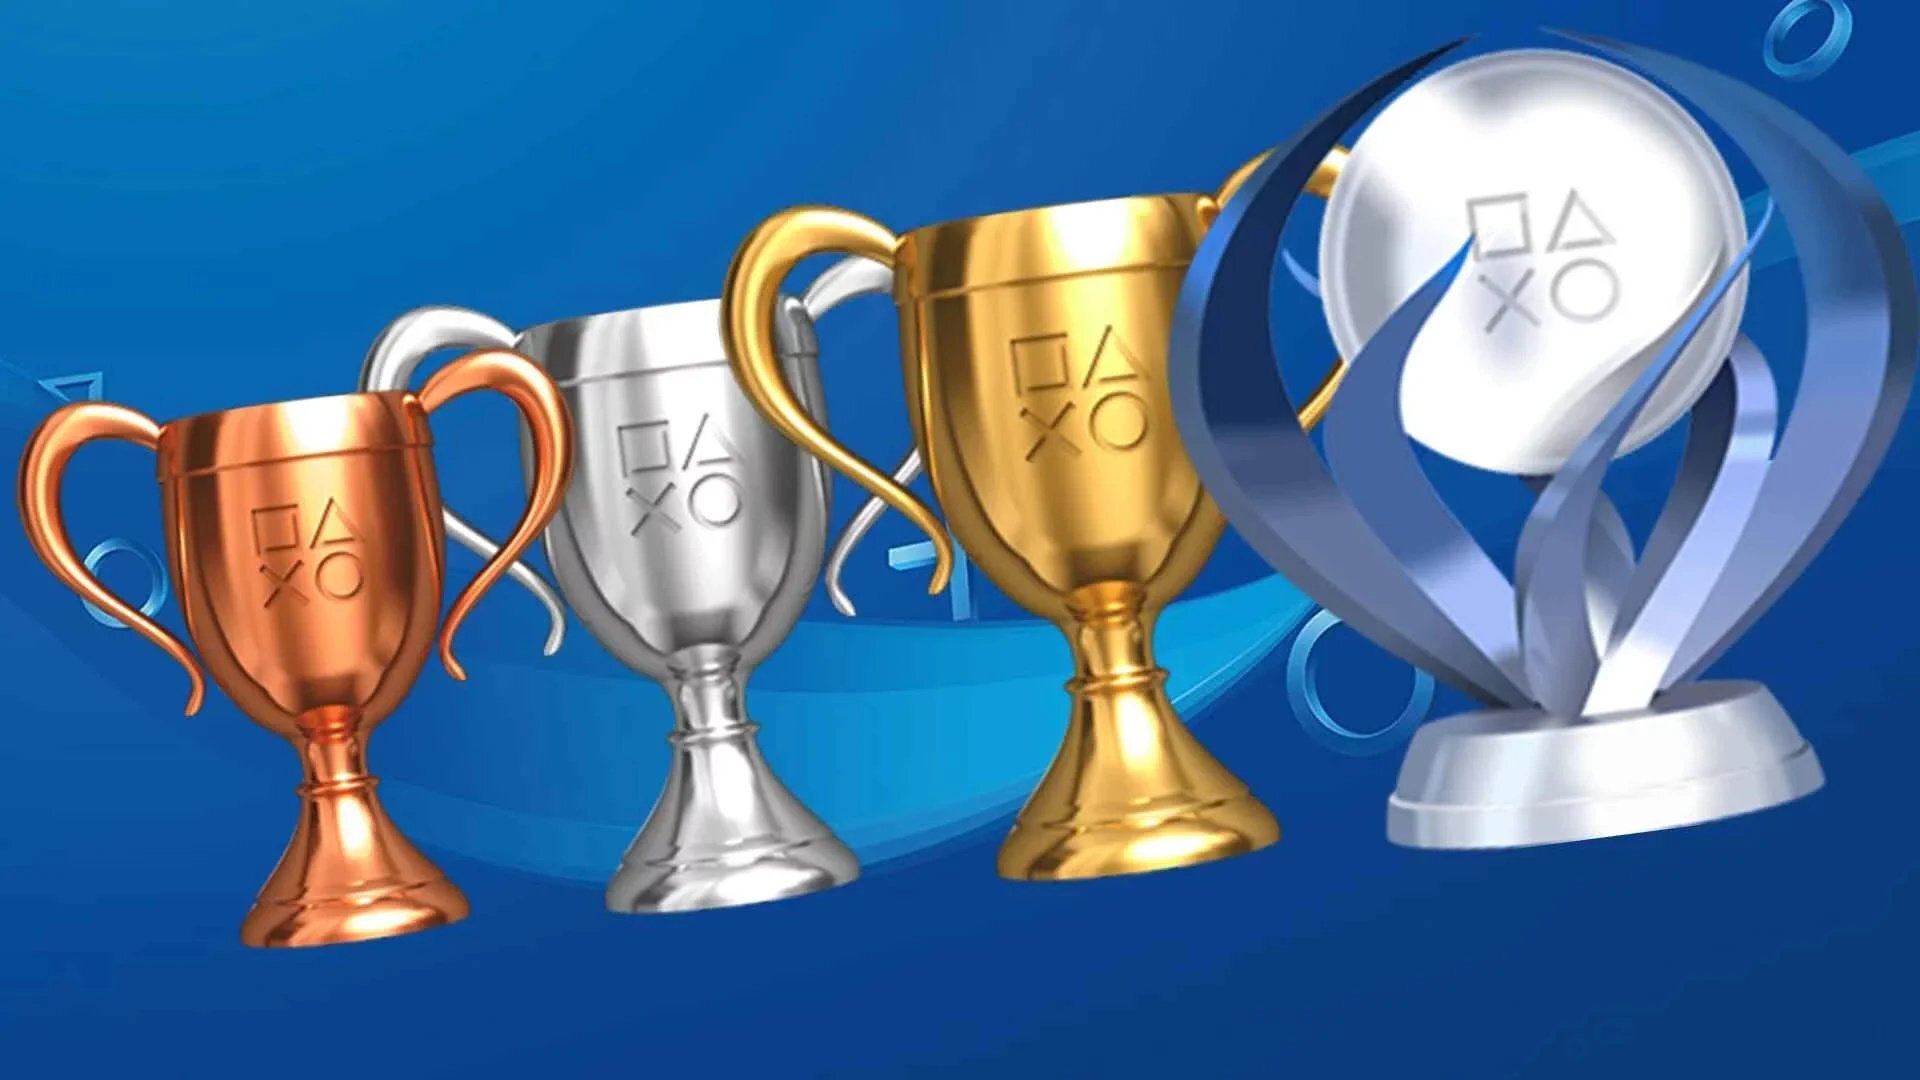 resultat Først Flere PS5 Trophies: Everything You Need to Know | Digital Trends